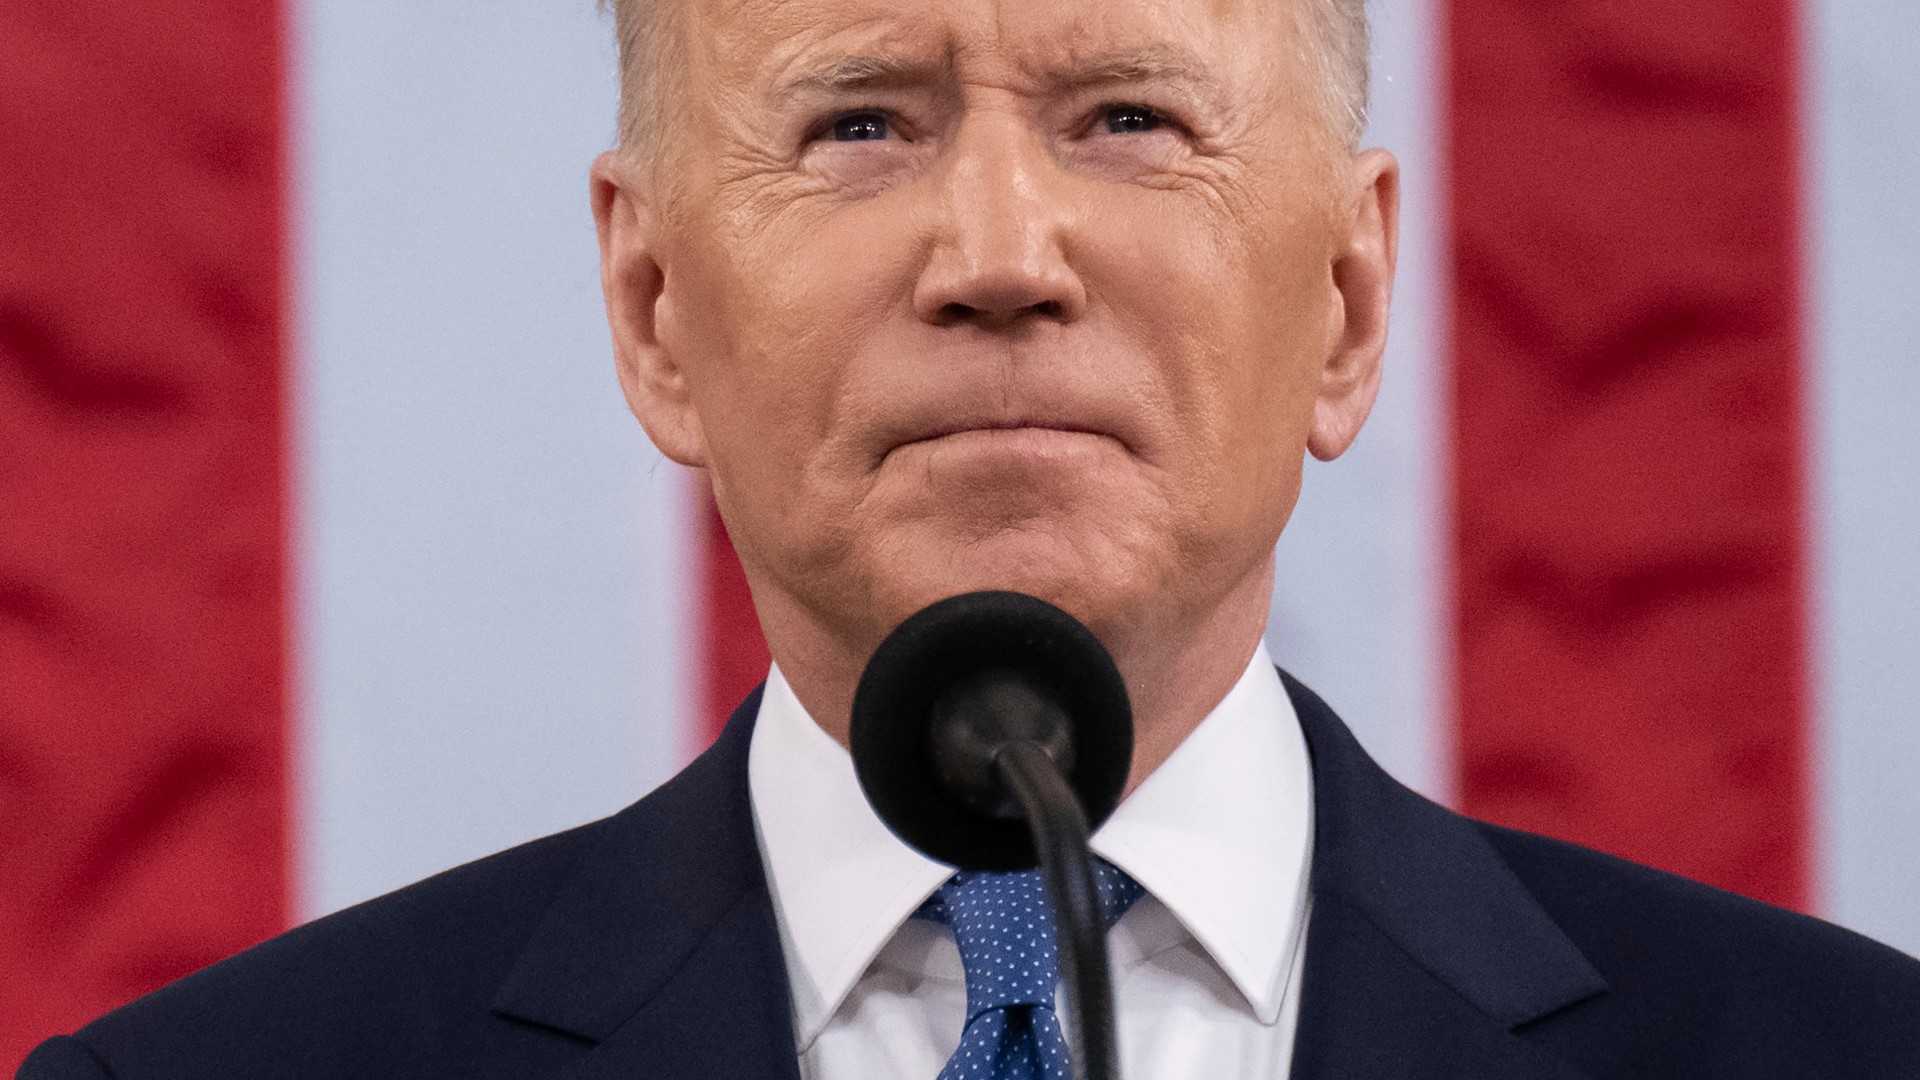 Biden delivers his 2nd State of the Union on Tuesday night before a politically divided Congress.